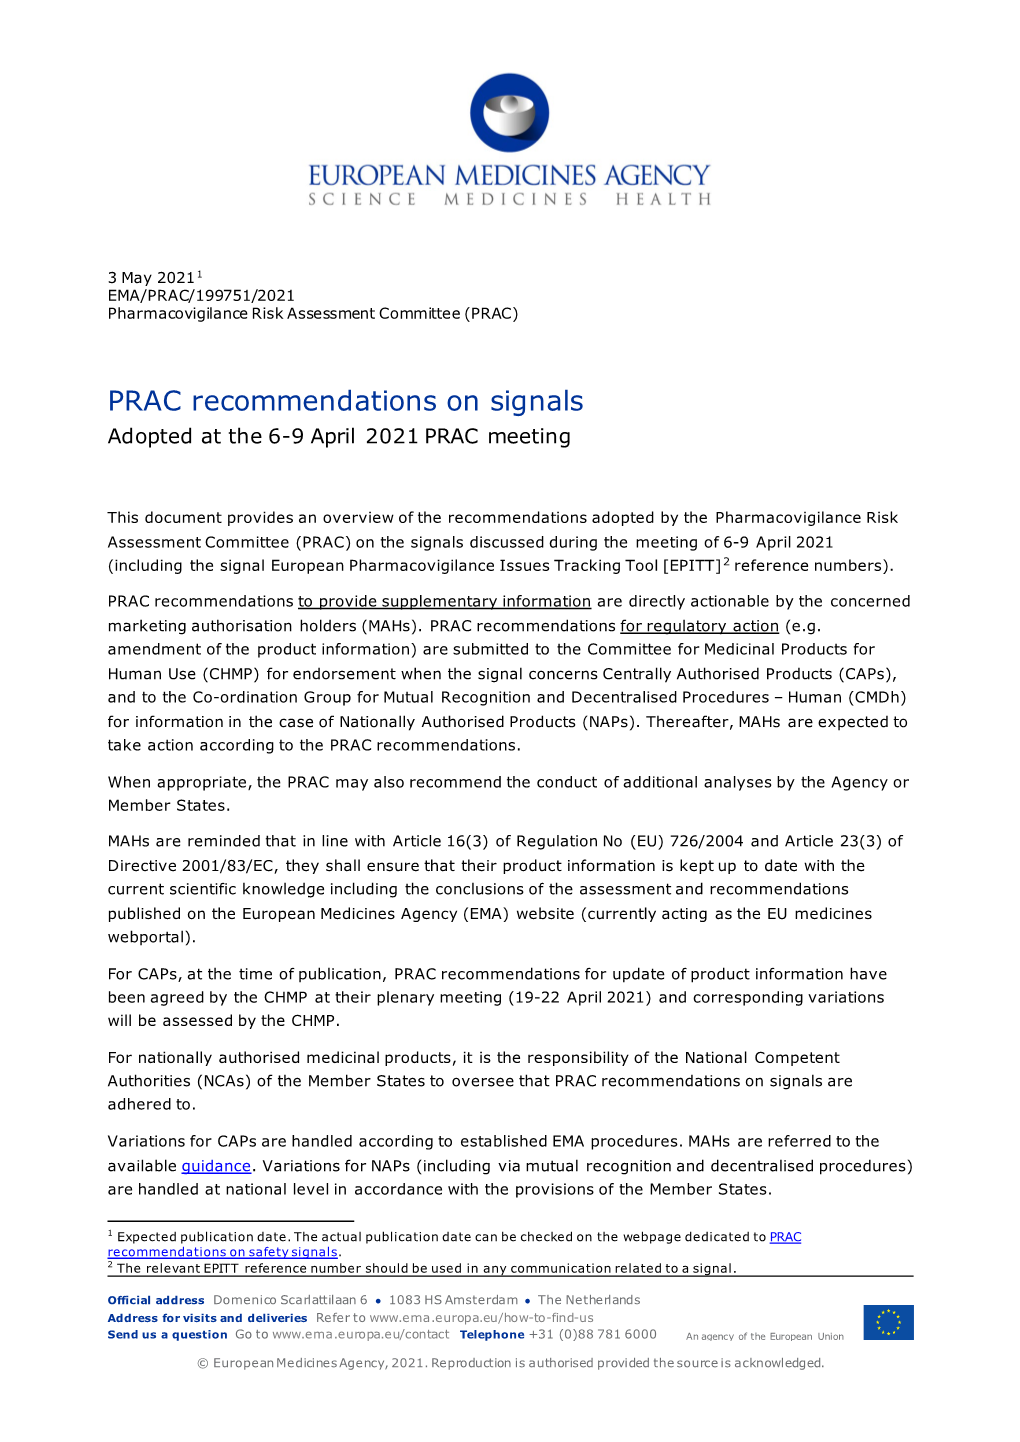 PRAC Recommendations on Signals Adopted at the 6-9 April 2021 PRAC En